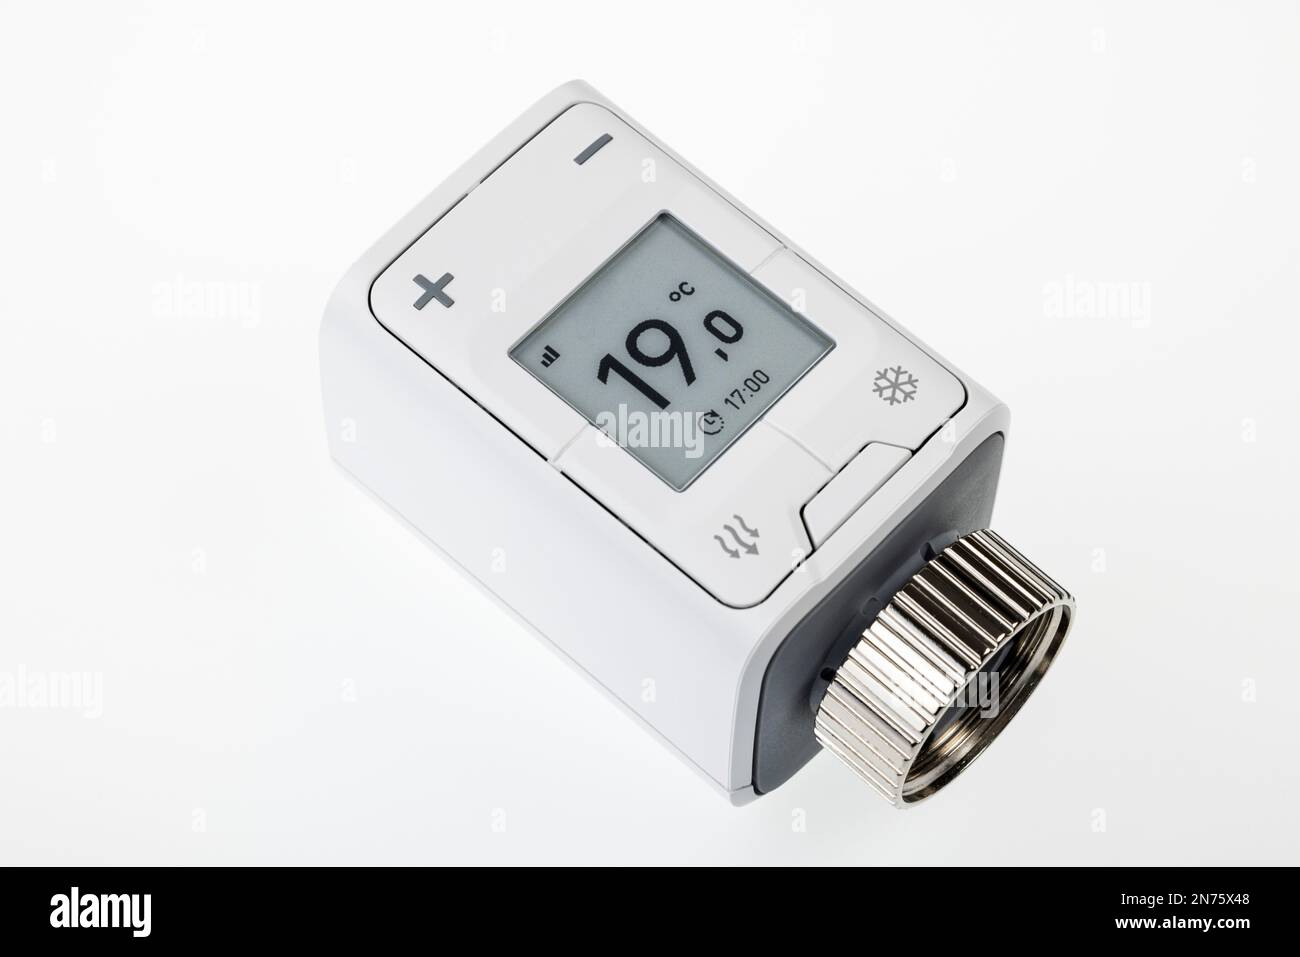 https://c8.alamy.com/comp/2N75X48/wlan-radiator-thermostat-fritz!-dect-302-display-shows-1c-smart-home-technology-icon-image-networking-digital-energy-costs-rising-heating-costs-white-background-2N75X48.jpg